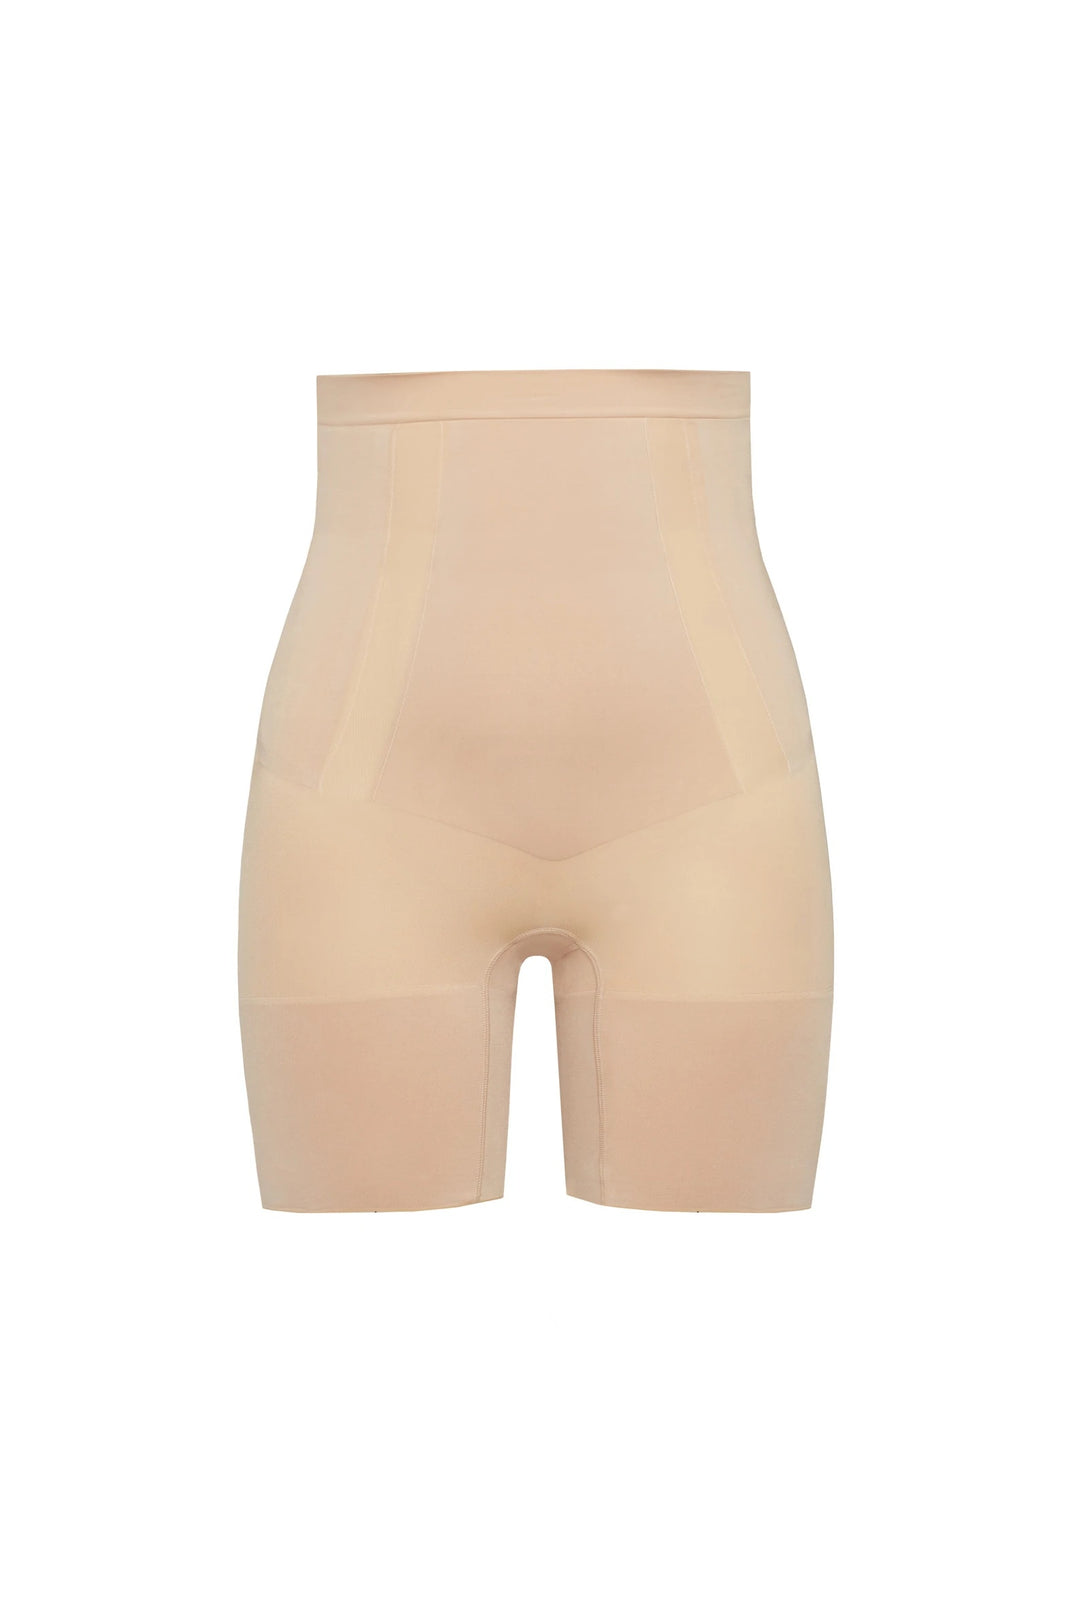 SPANX ONCORE HIGH-WAISTED MID-THIGH SHAPER SHORT SOFT NUDE